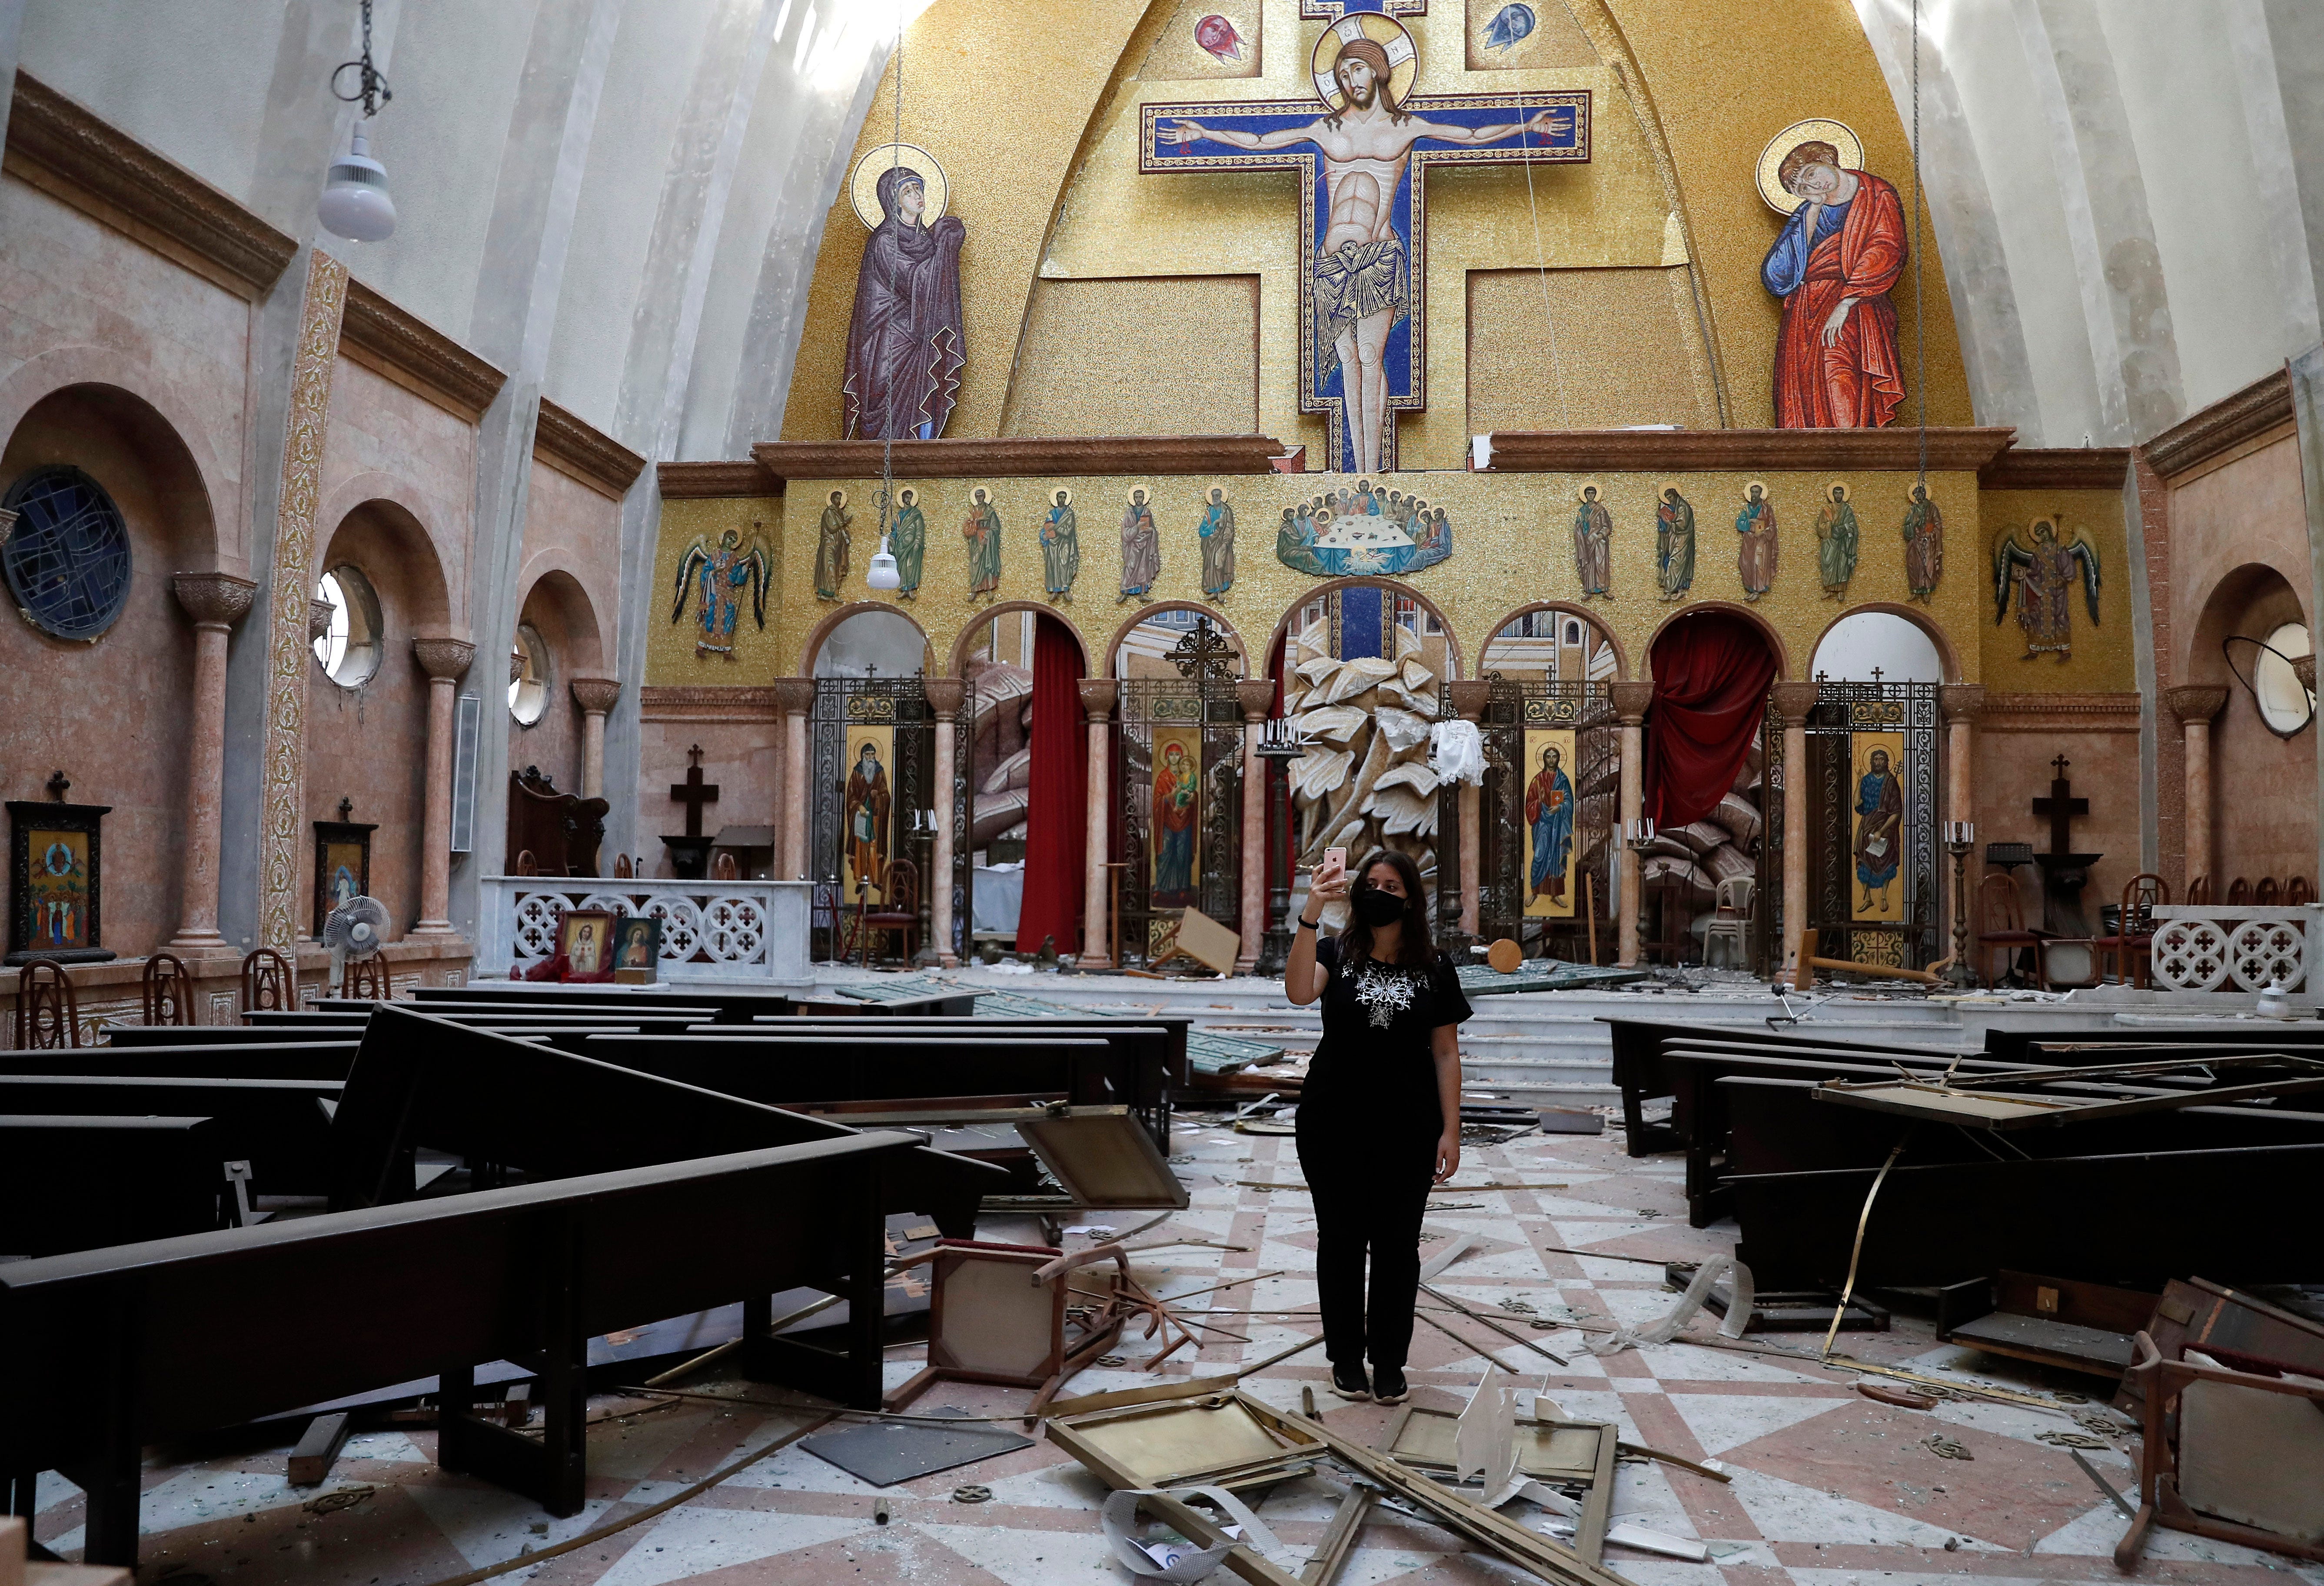 A woman takes pictures of a damaged church, after an explosion hit the seaport of Beirut, Lebanon, Wednesday, Aug. 5, 2020. Residents of Beirut awoke to a scene of utter devastation on Wednesday, a day after a massive explosion at the port sent shock waves across the Lebanese capital.